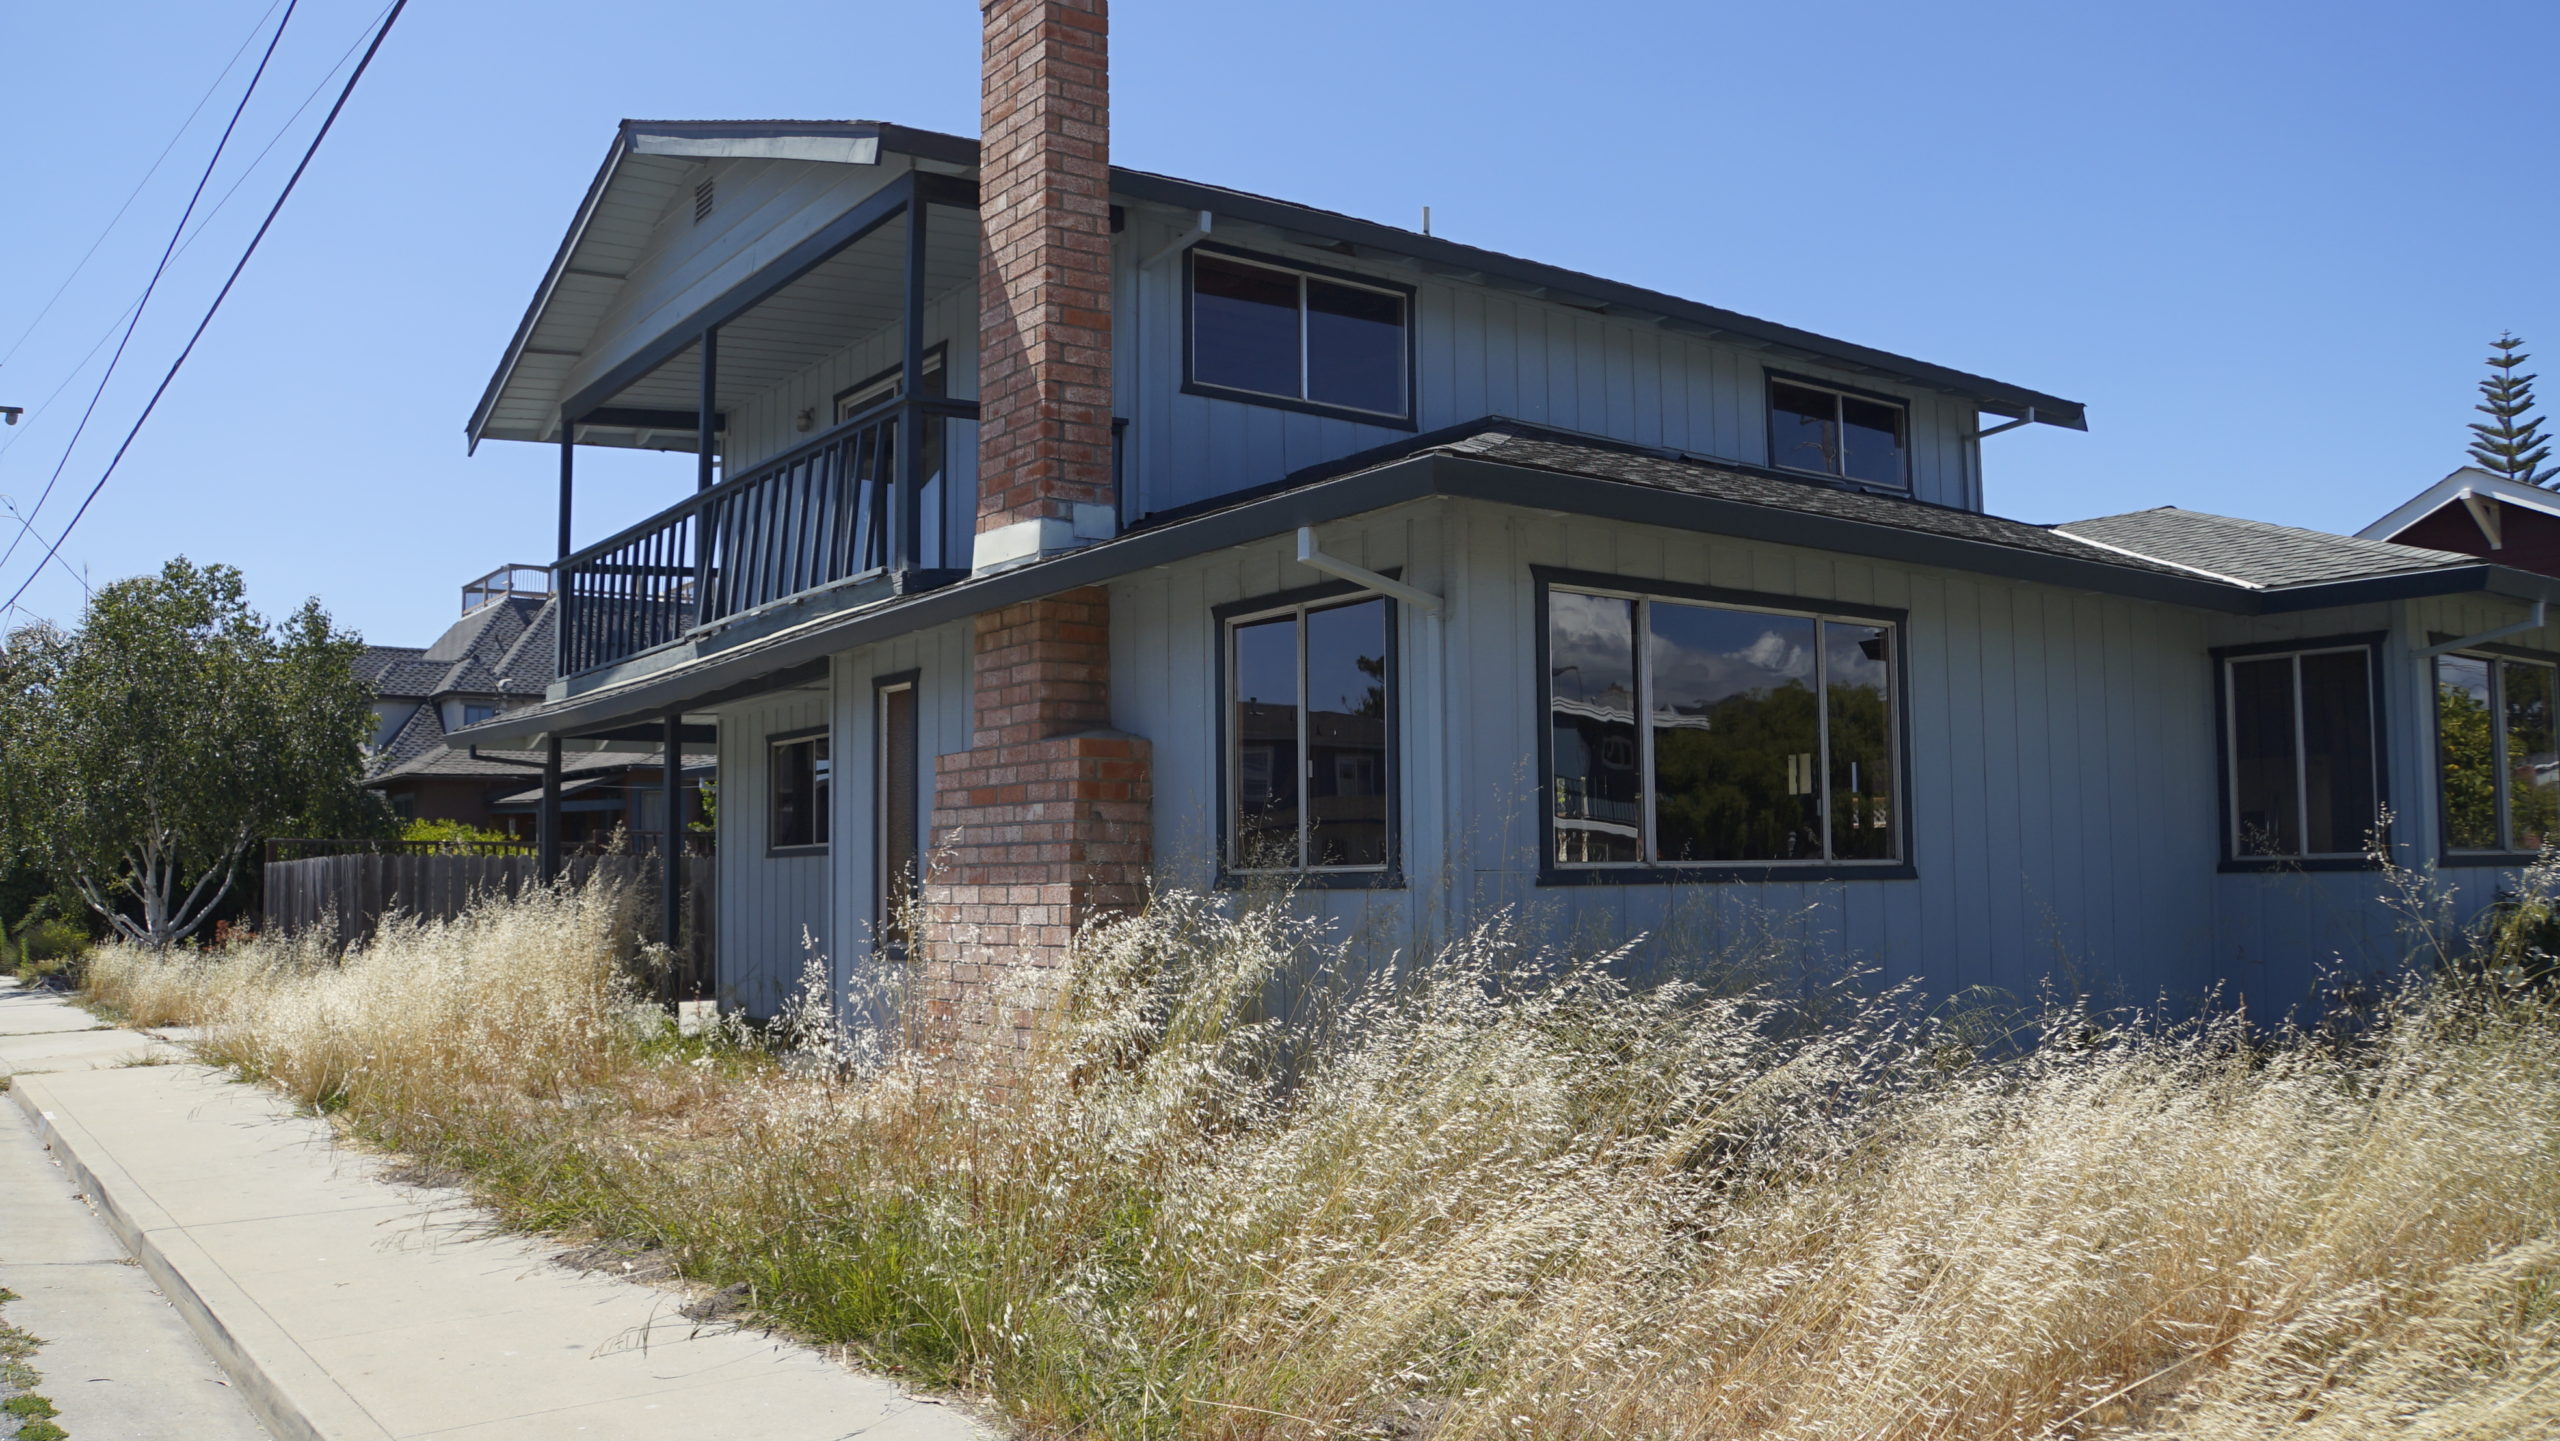 A four-bedroom home near West Cliff Drive in Santa Cruz sits empty in June after it was sold for $2.3 million in November. Homes under active construction would be exempt from a proposed tax on empty homes. (Kara Meyberg Guzman -- Santa Cruz Local)